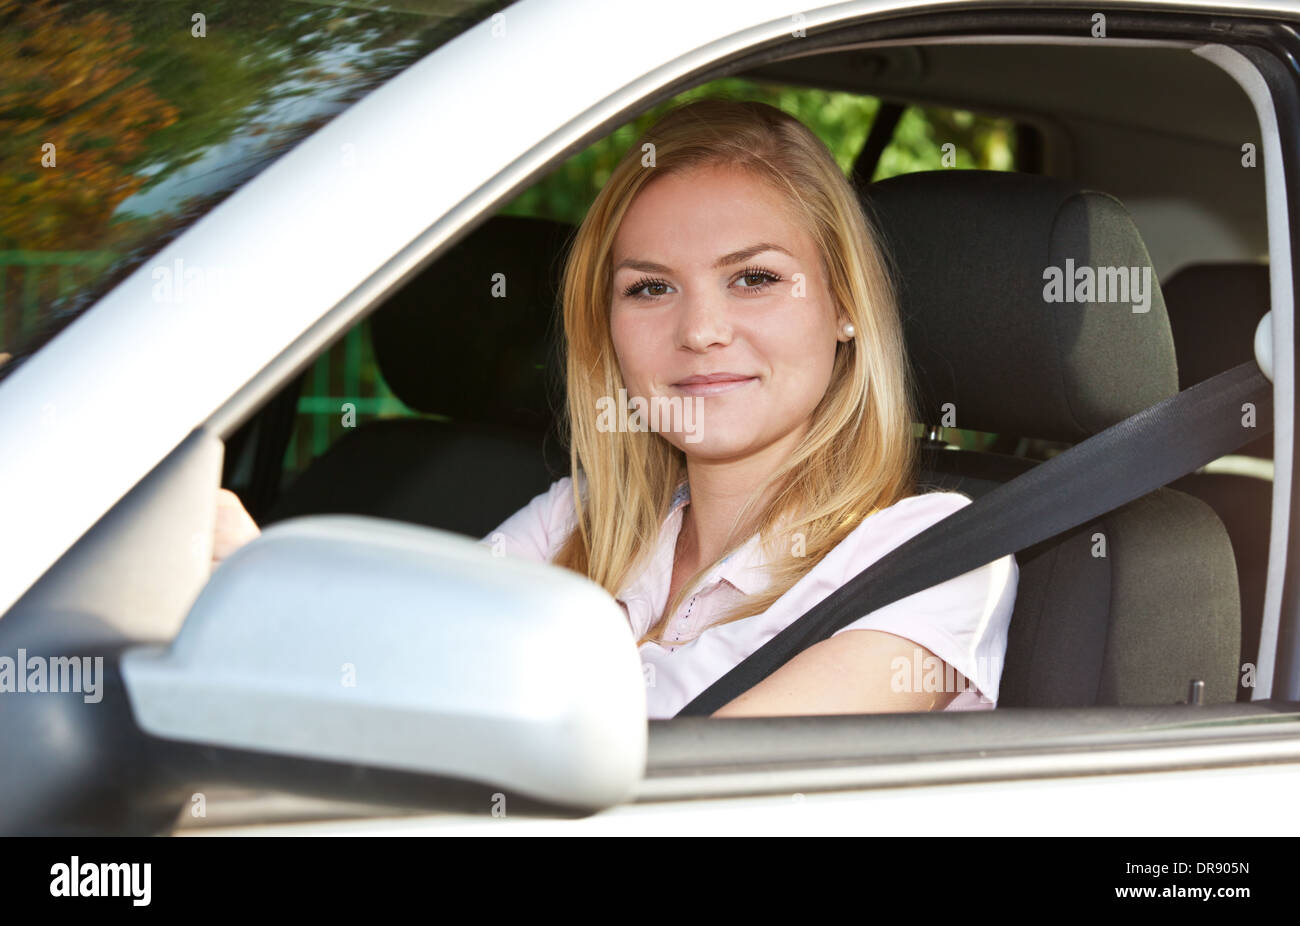 Attractive young woman in her car. Stock Photo